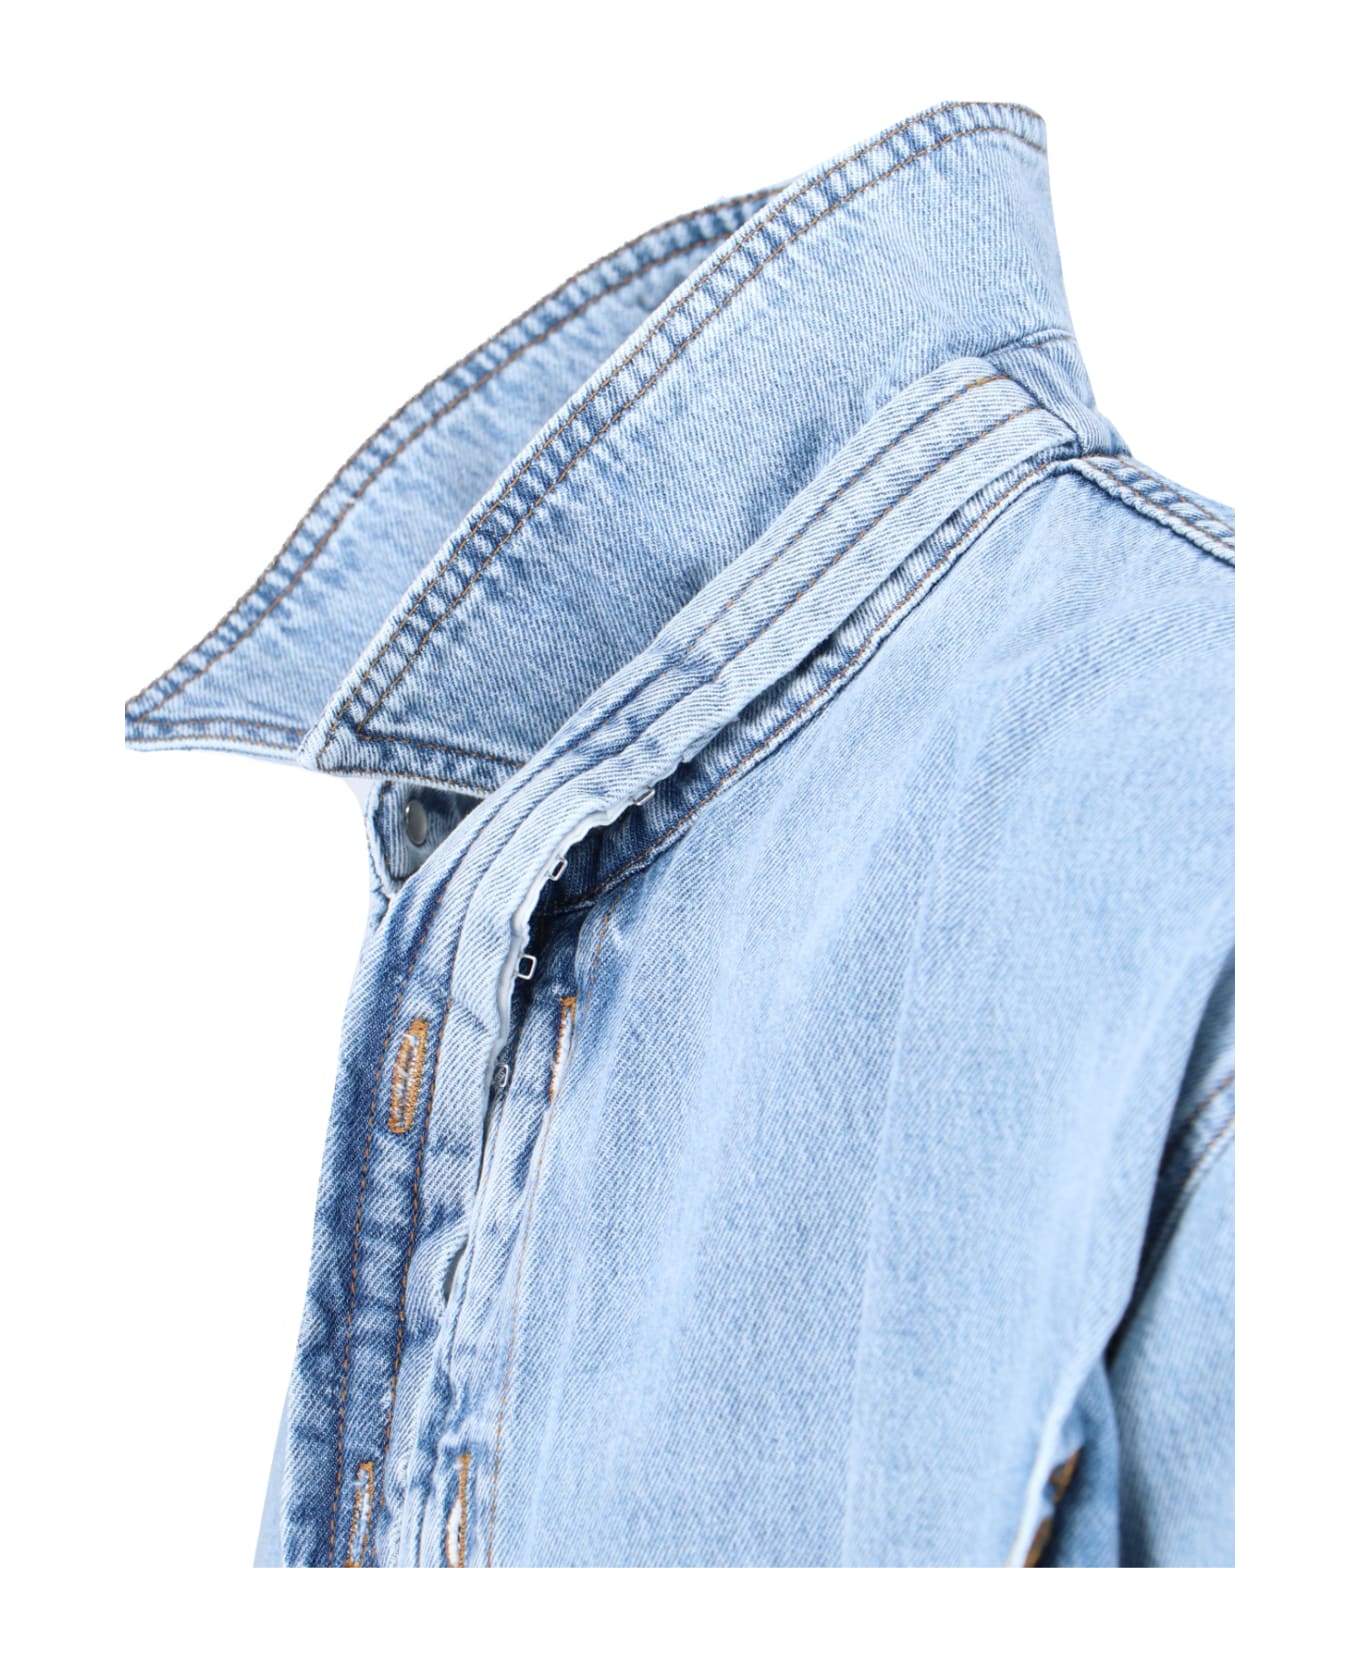 Y/Project 'hook And Eye' Shirt Jacket - Light Blue シャツ